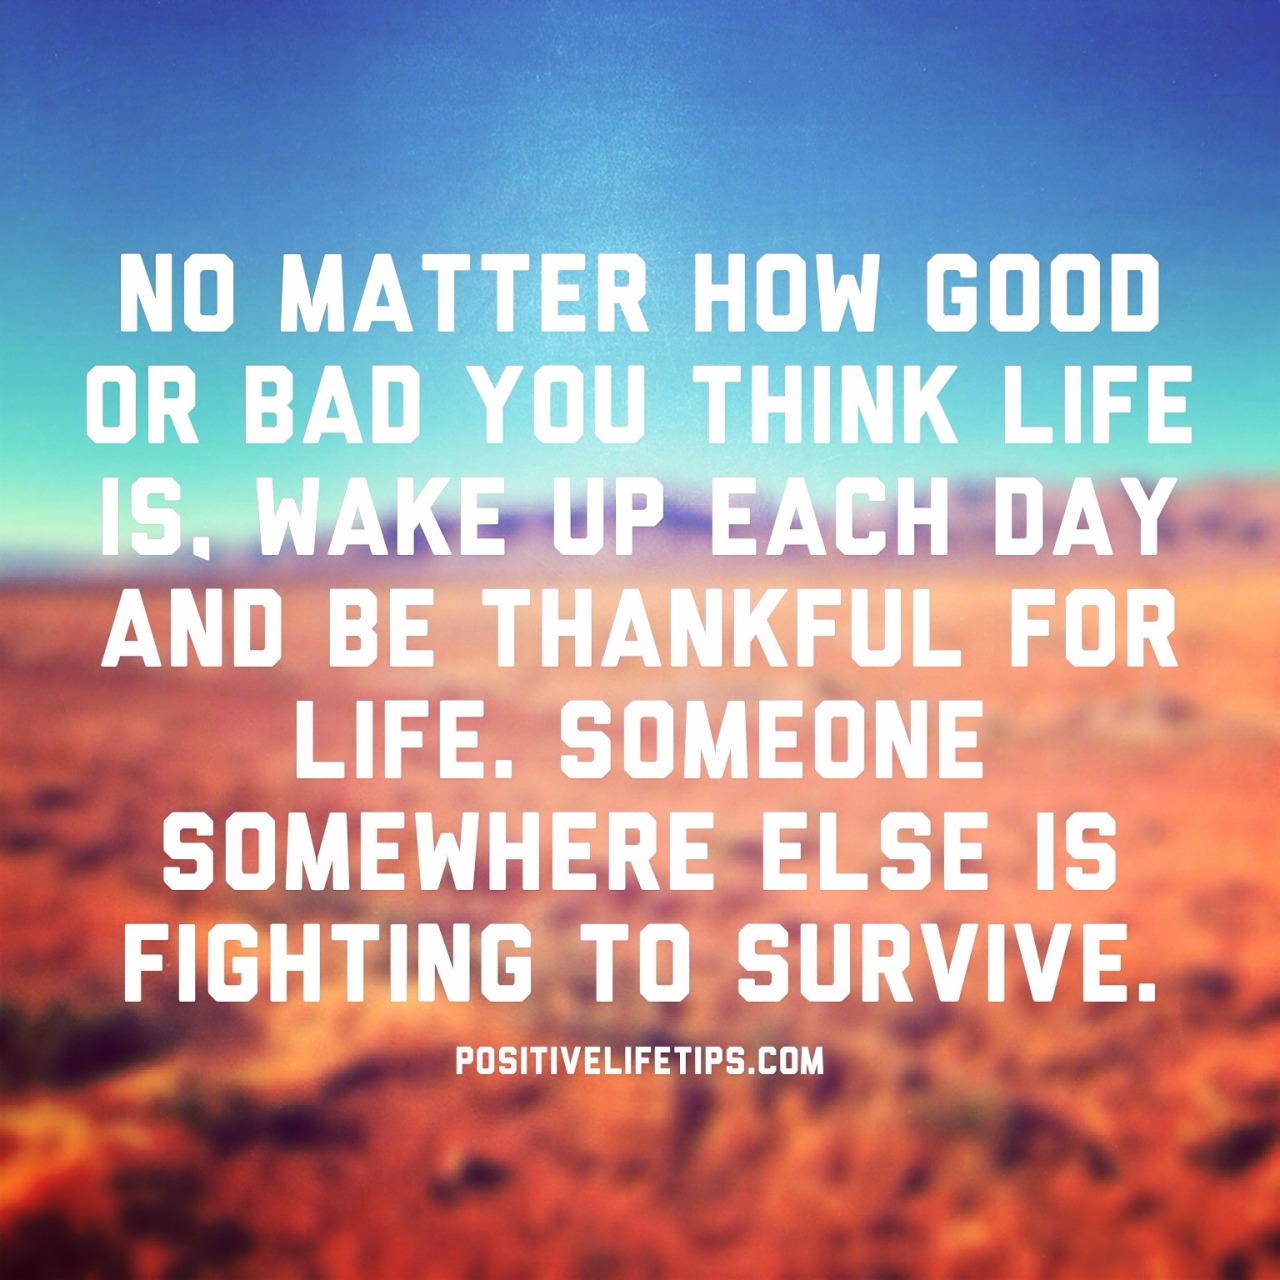 tumblr quotes positive thankful have much to Tips so Positive Life for We â€“ be